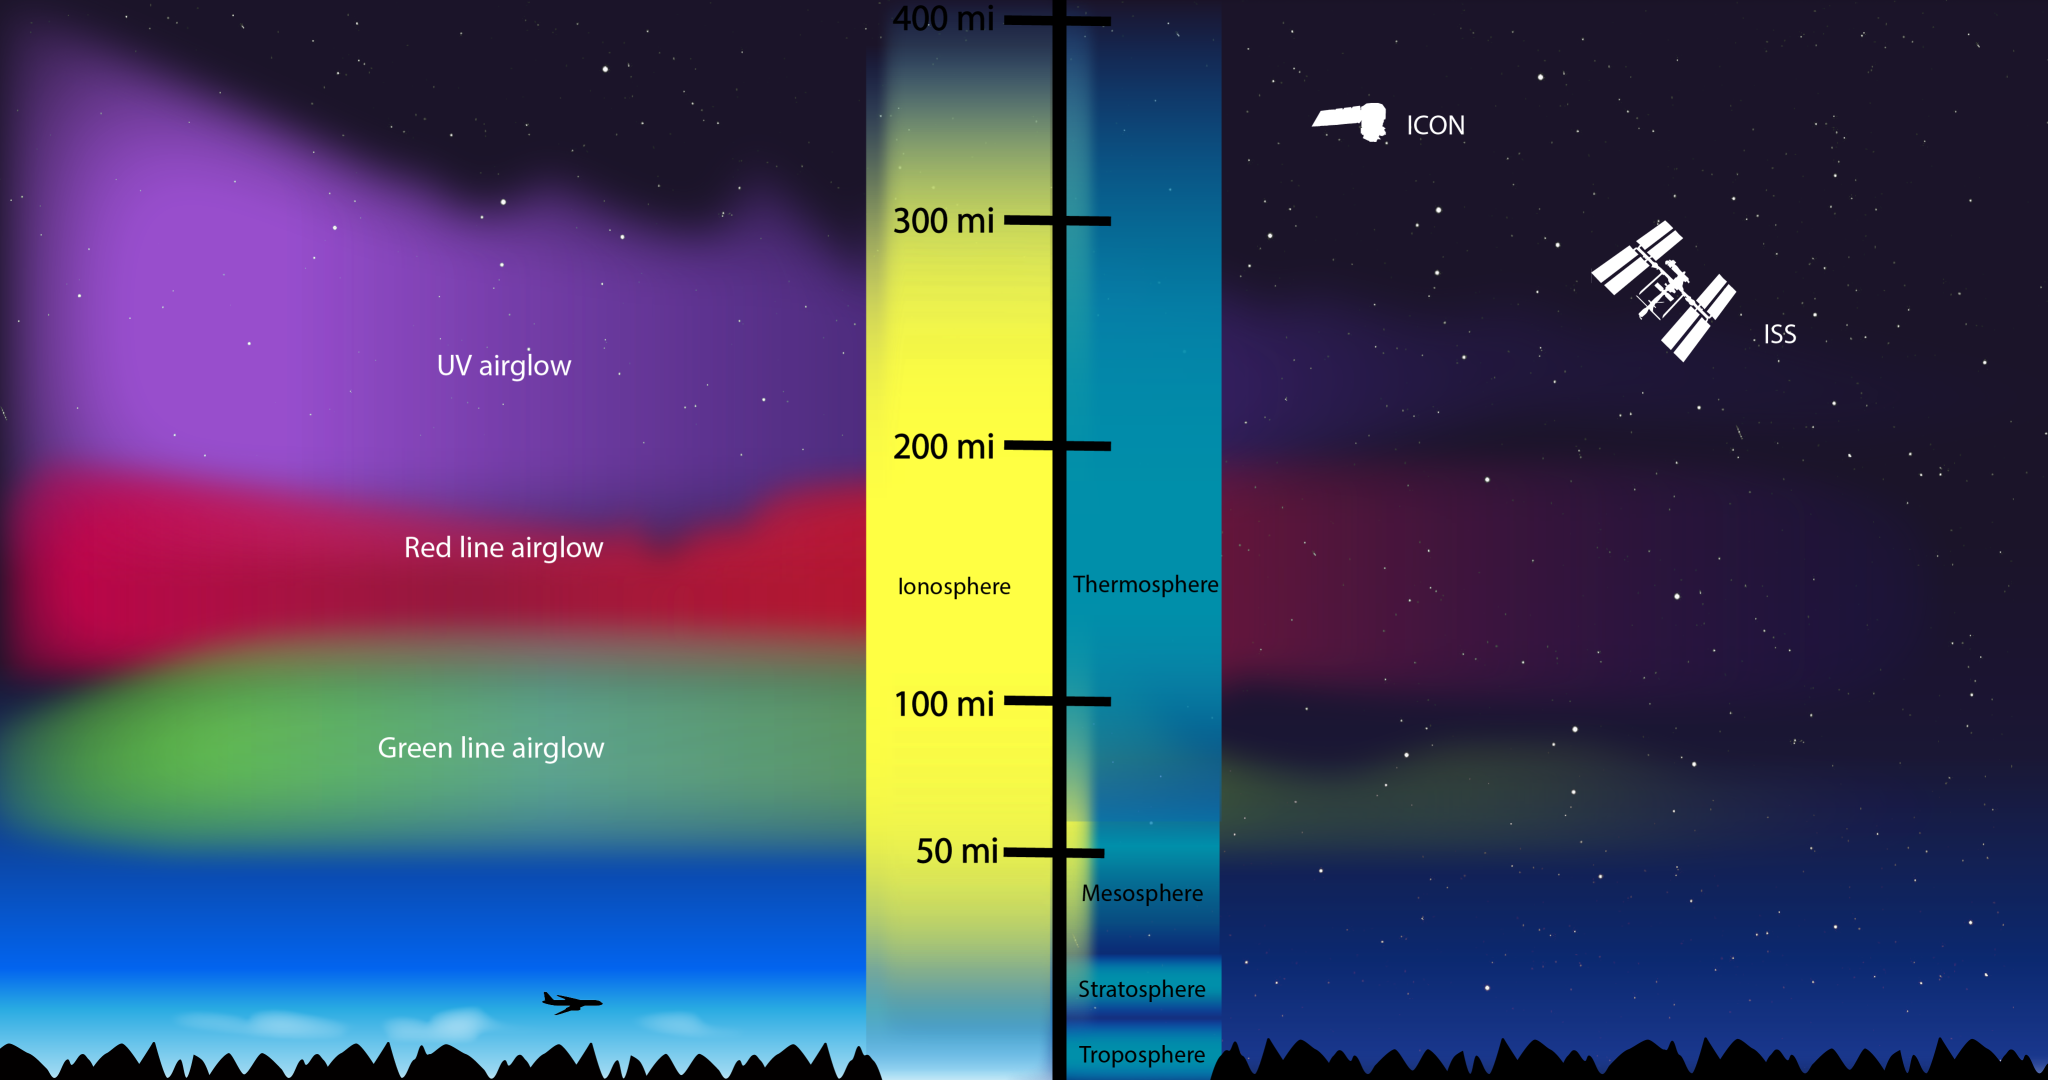 Informational graphic showing cross section of Earth's atmospheric layers. Below 50 miles is labeled Troposphere, Stratosphere, and Mesosphere. Between 50 and 100 miles is still Mesosphere, but Green Line Airglow is marked at this level. Between 100 and 200 miles, the Thermosphere and Ionosphere are both labeled, where Red Line Airglow overlaps. At 200 miles and above is still the Thermosphere, but between 200 and 300 miles UV Airglow shows up. Icon is shown orbiting above 300 miles. The ISS is labeled right at 300. 